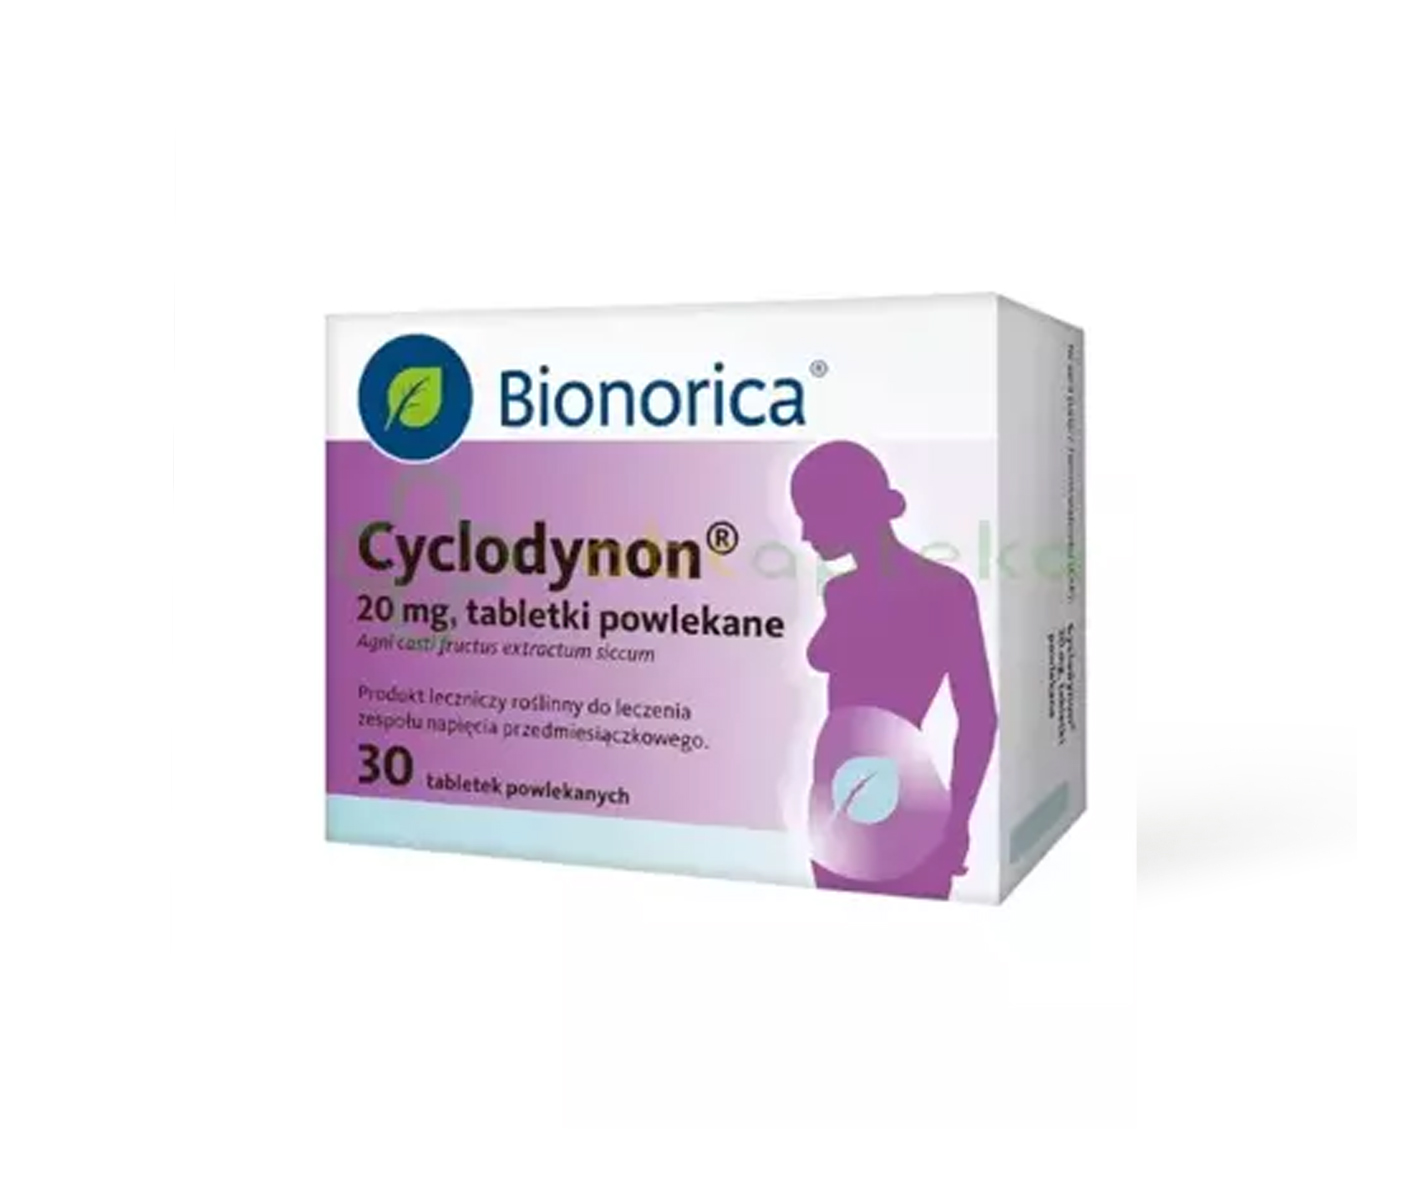 Bionorica, Cyclodynon, suplement diety na PMS